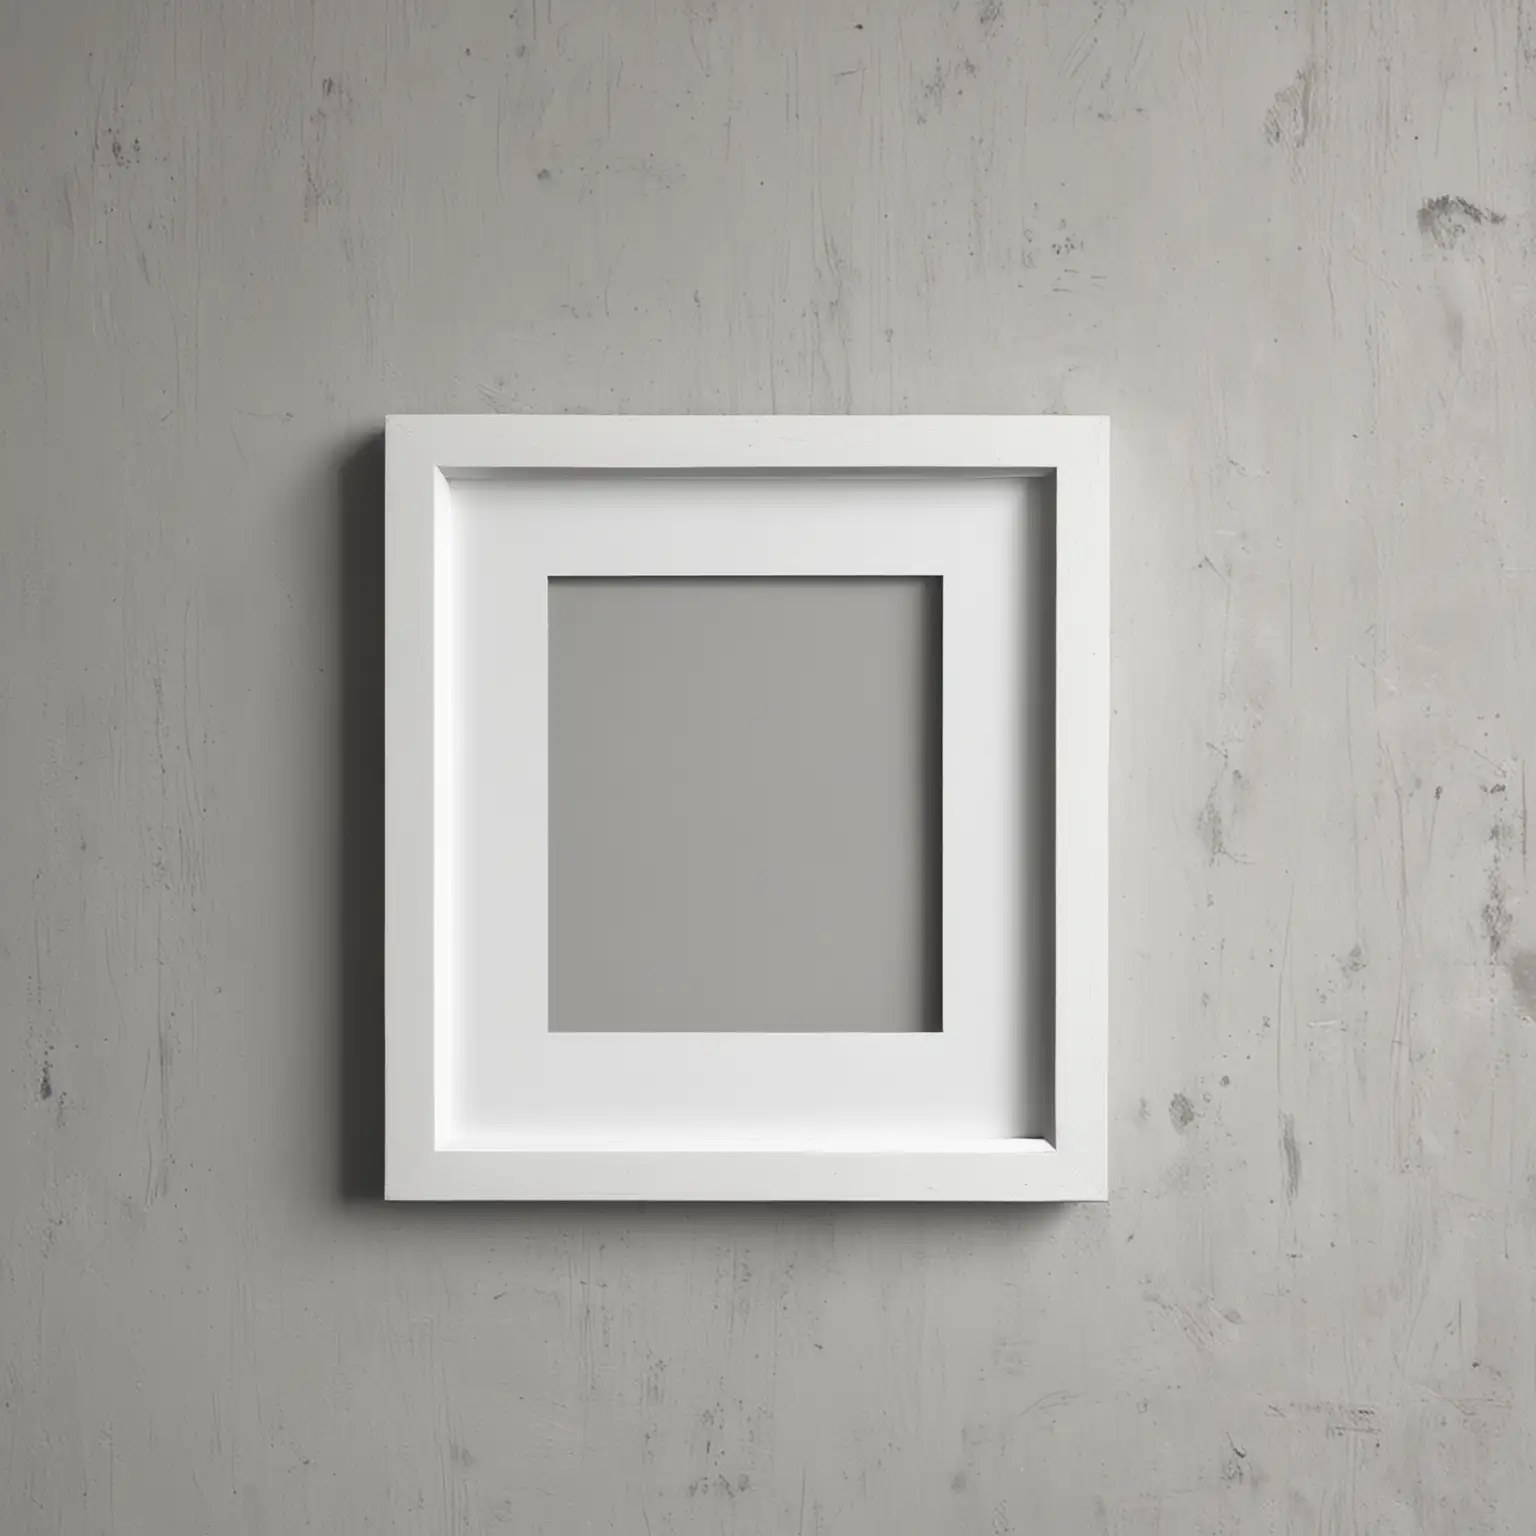 picture frame, white, flat and smooth, hung on the wall